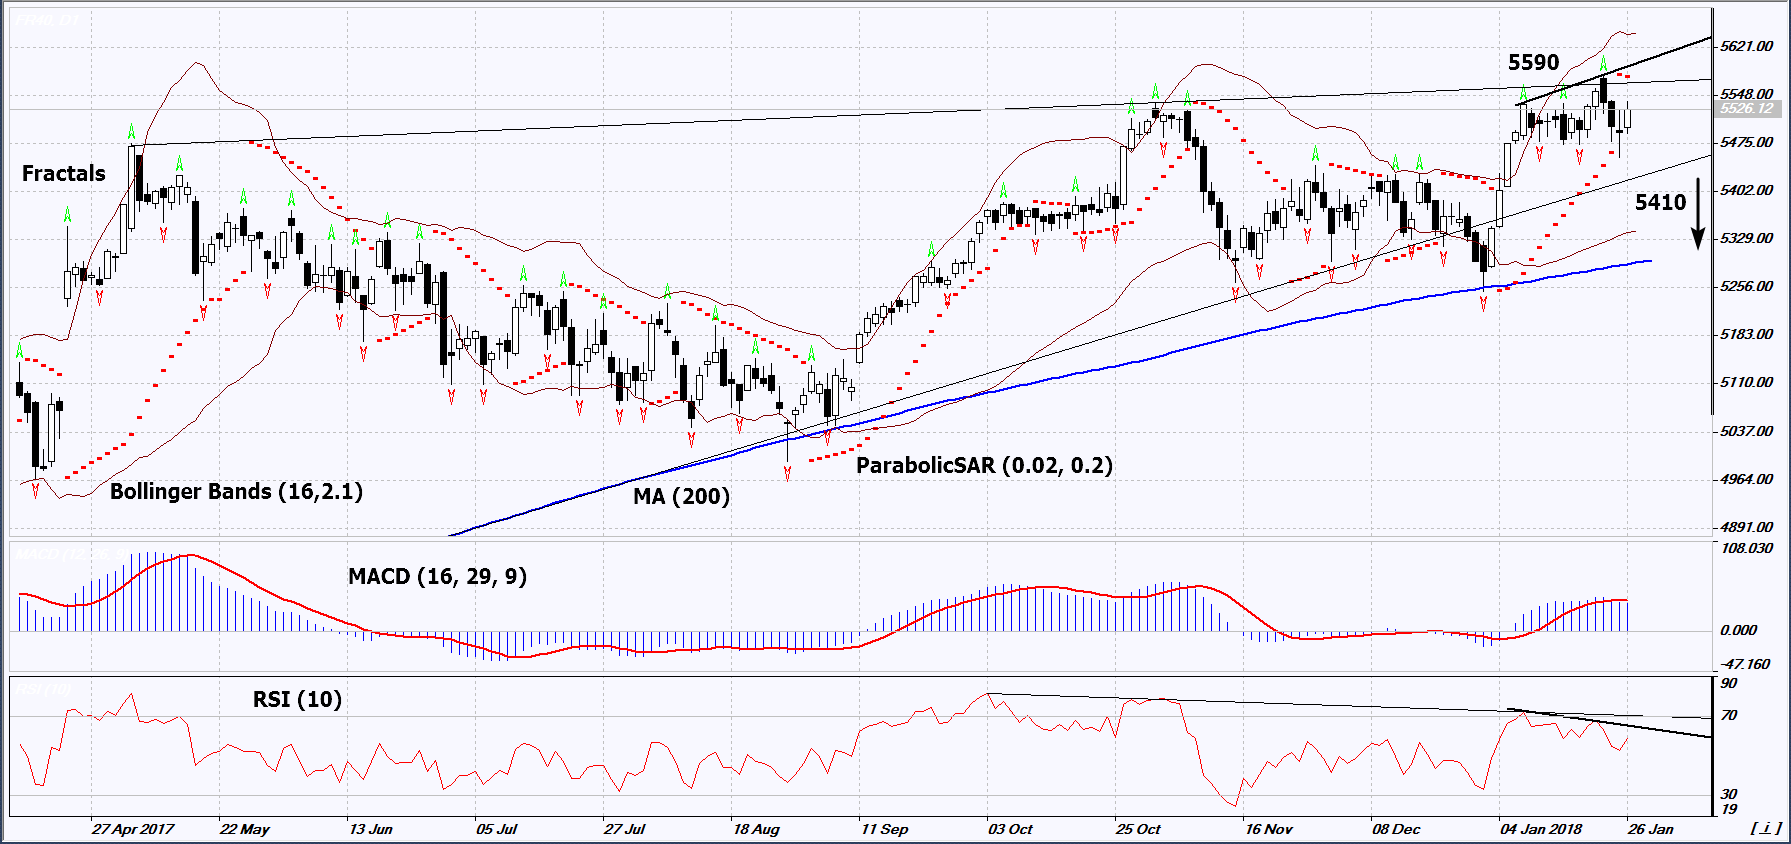 CAC40 Daily Chart